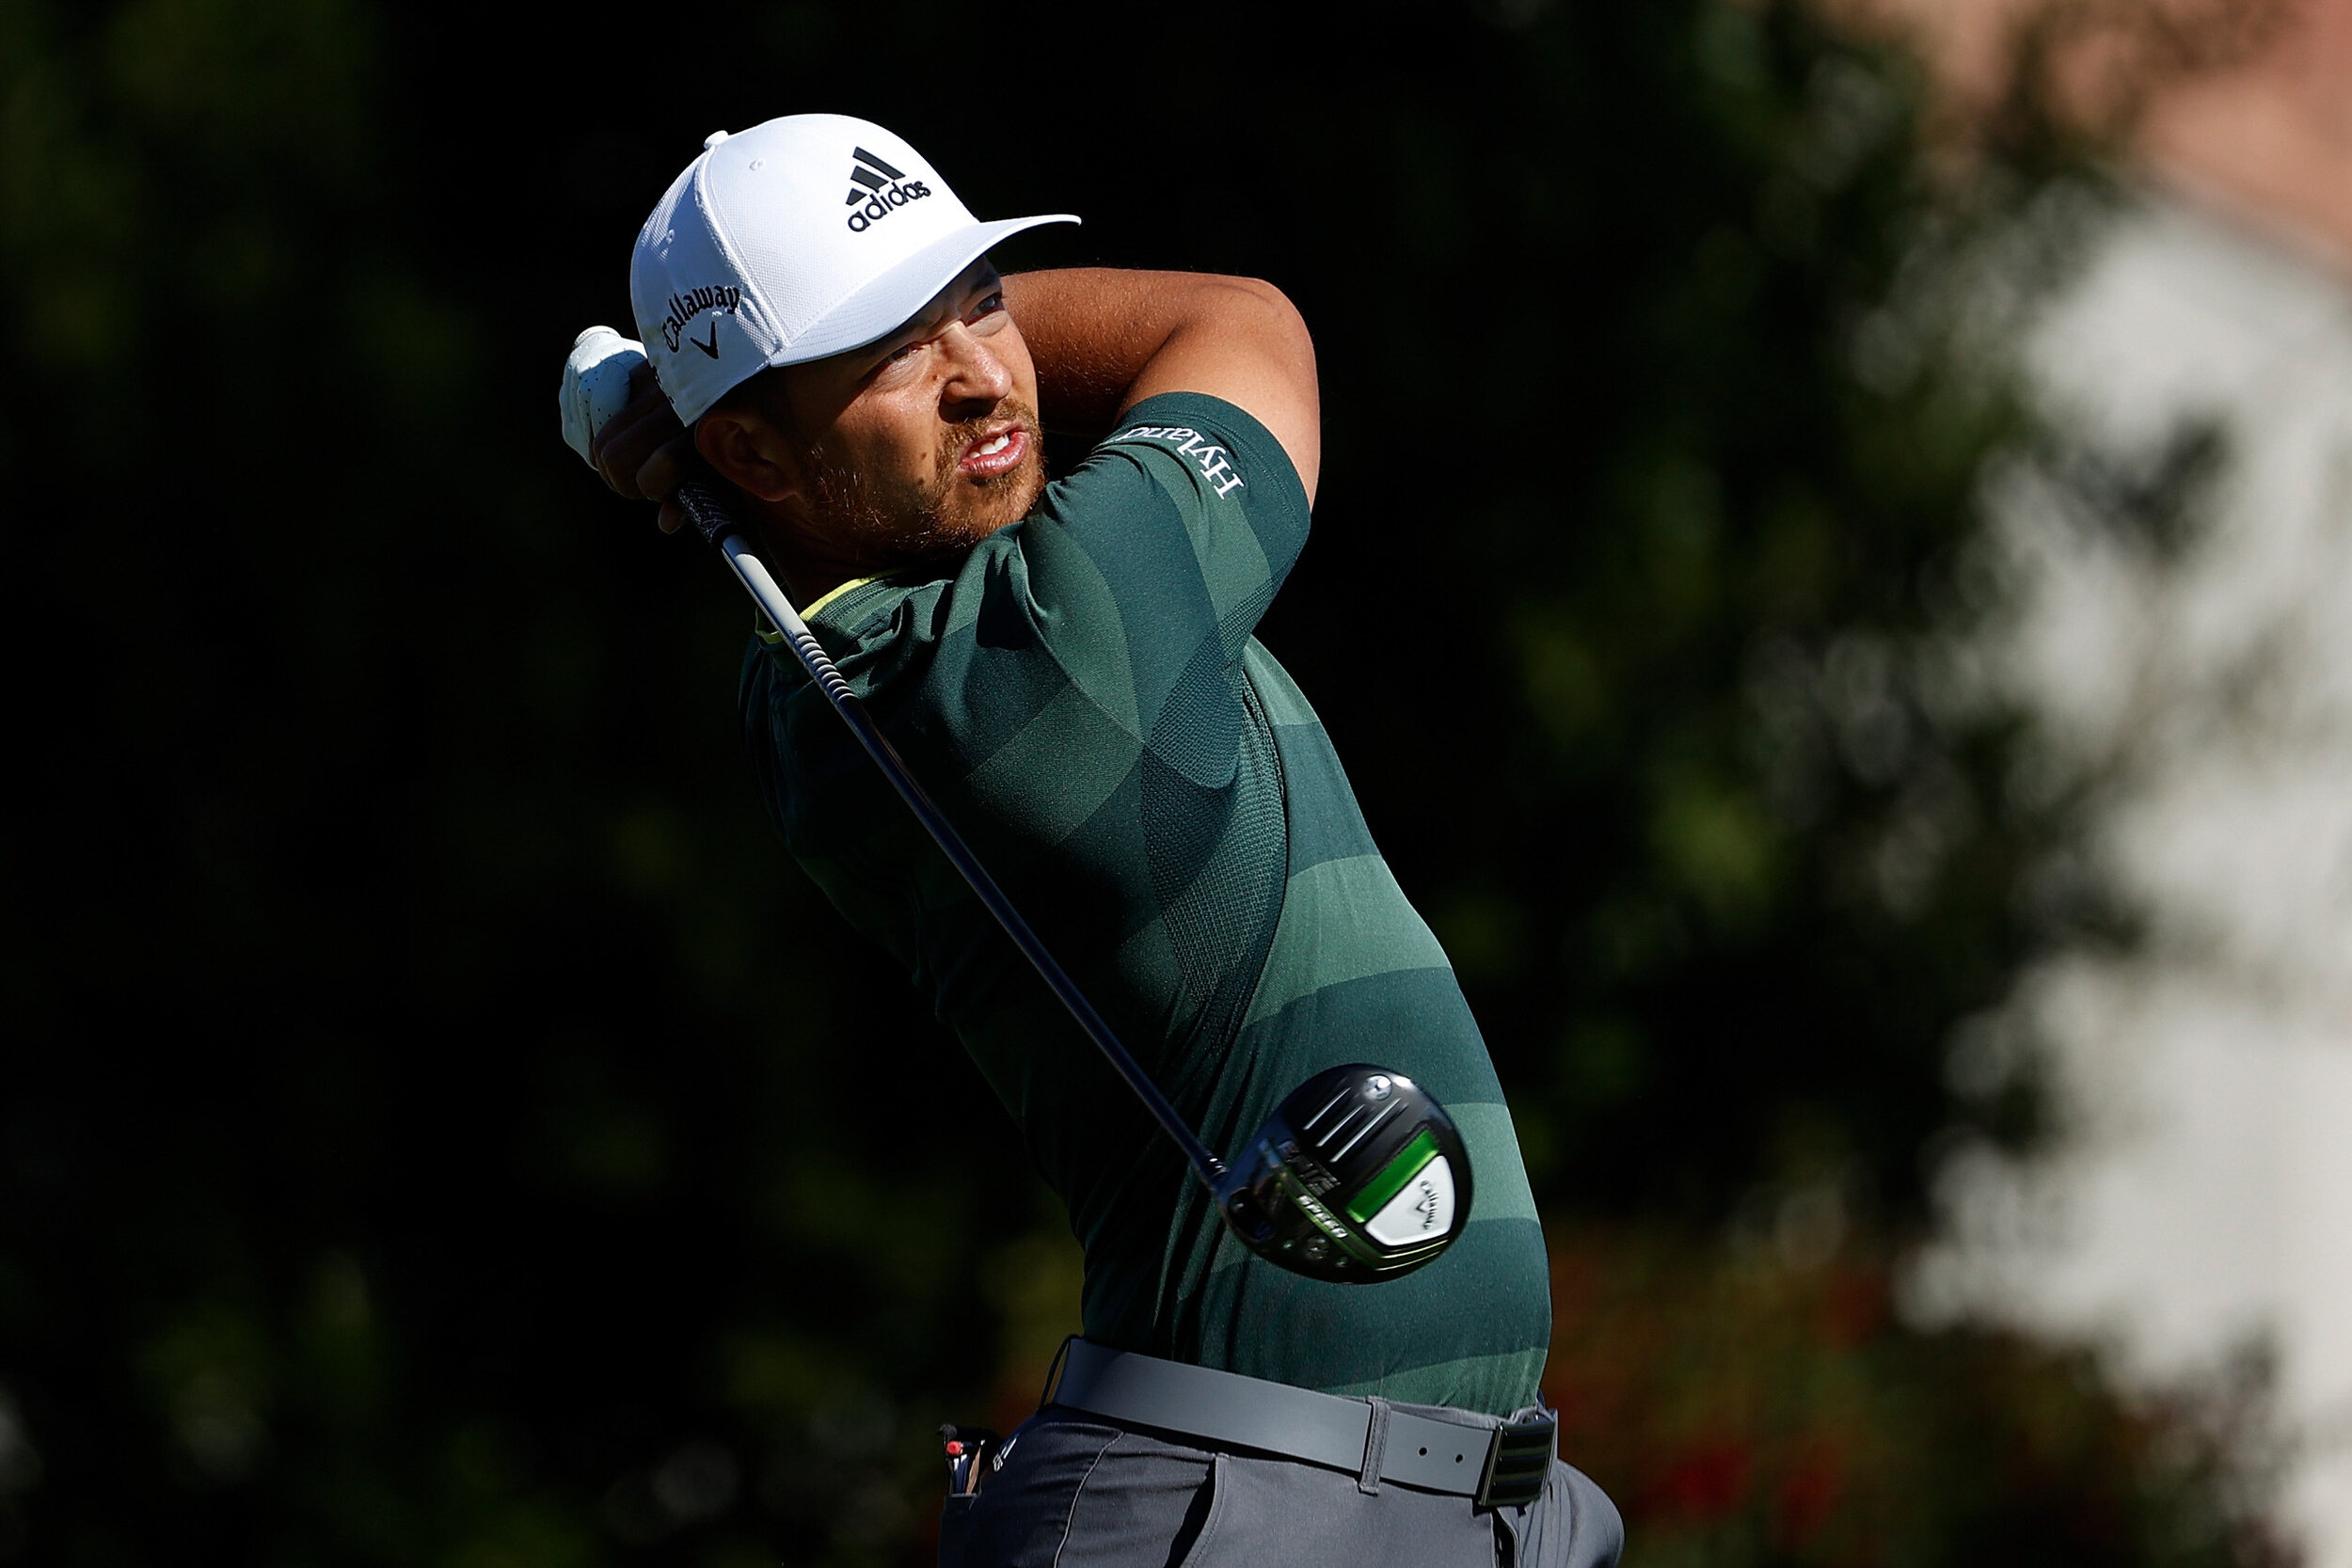  SCOTTSDALE, ARIZONA - FEBRUARY 06: Xander Schauffele of the United States hits his tee shot on the second hole during the third round of the Waste Management Phoenix Open at TPC Scottsdale on February 06, 2021 in Scottsdale, Arizona. (Photo by Chris